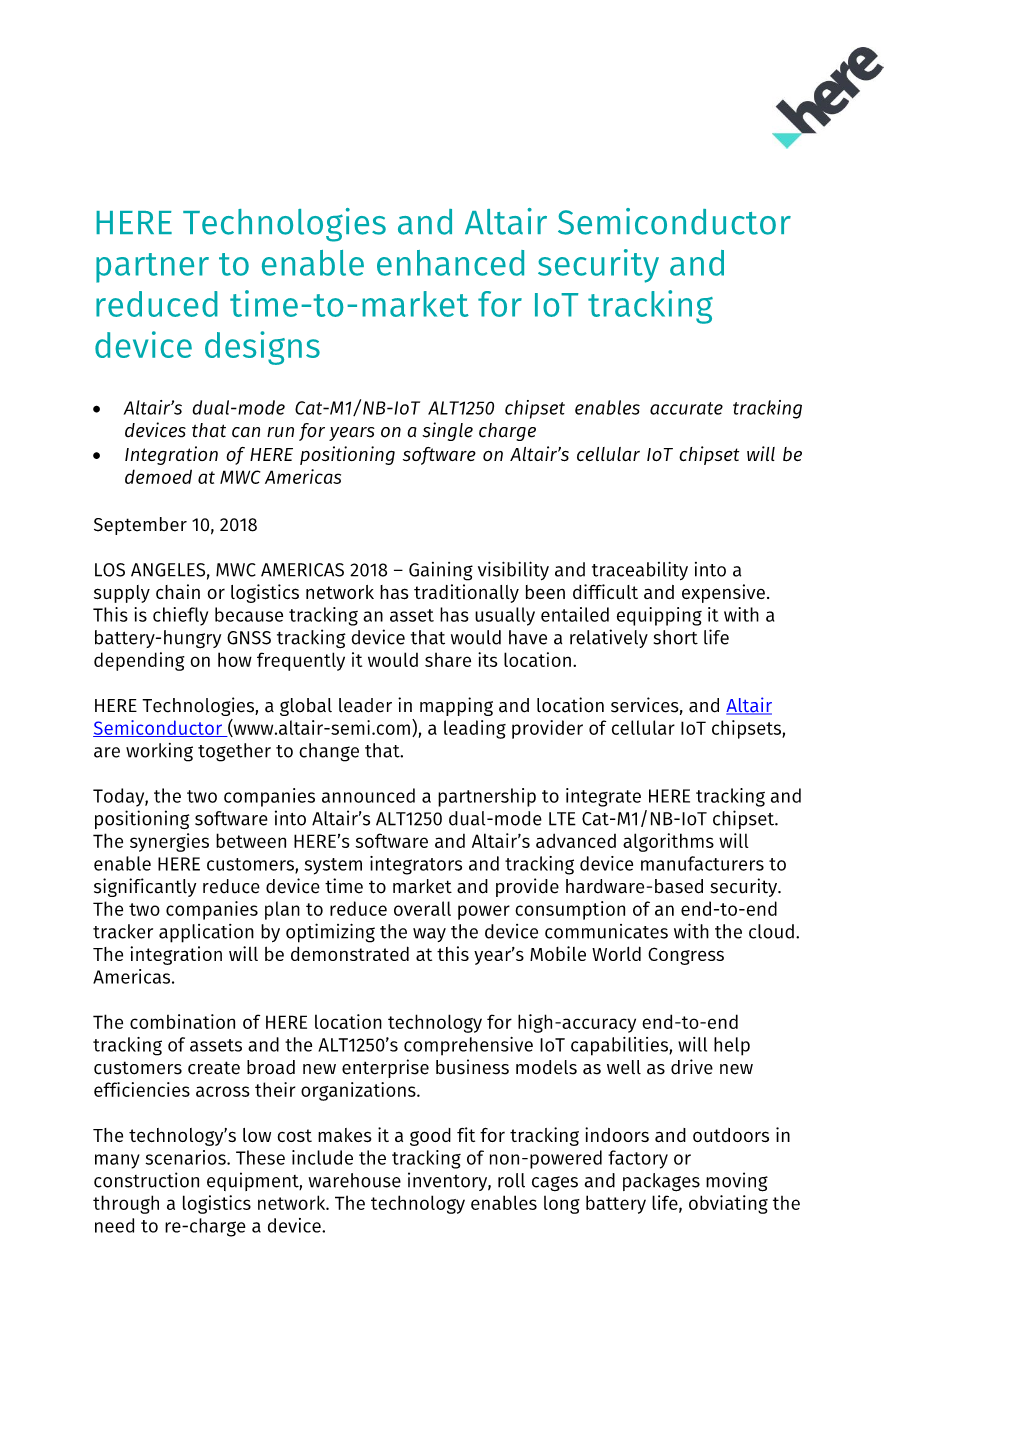 HERE Technologies and Altair Semiconductor Partner to Enable Enhanced Security and Reduced Time-To-Market for Iot Tracking Device Designs